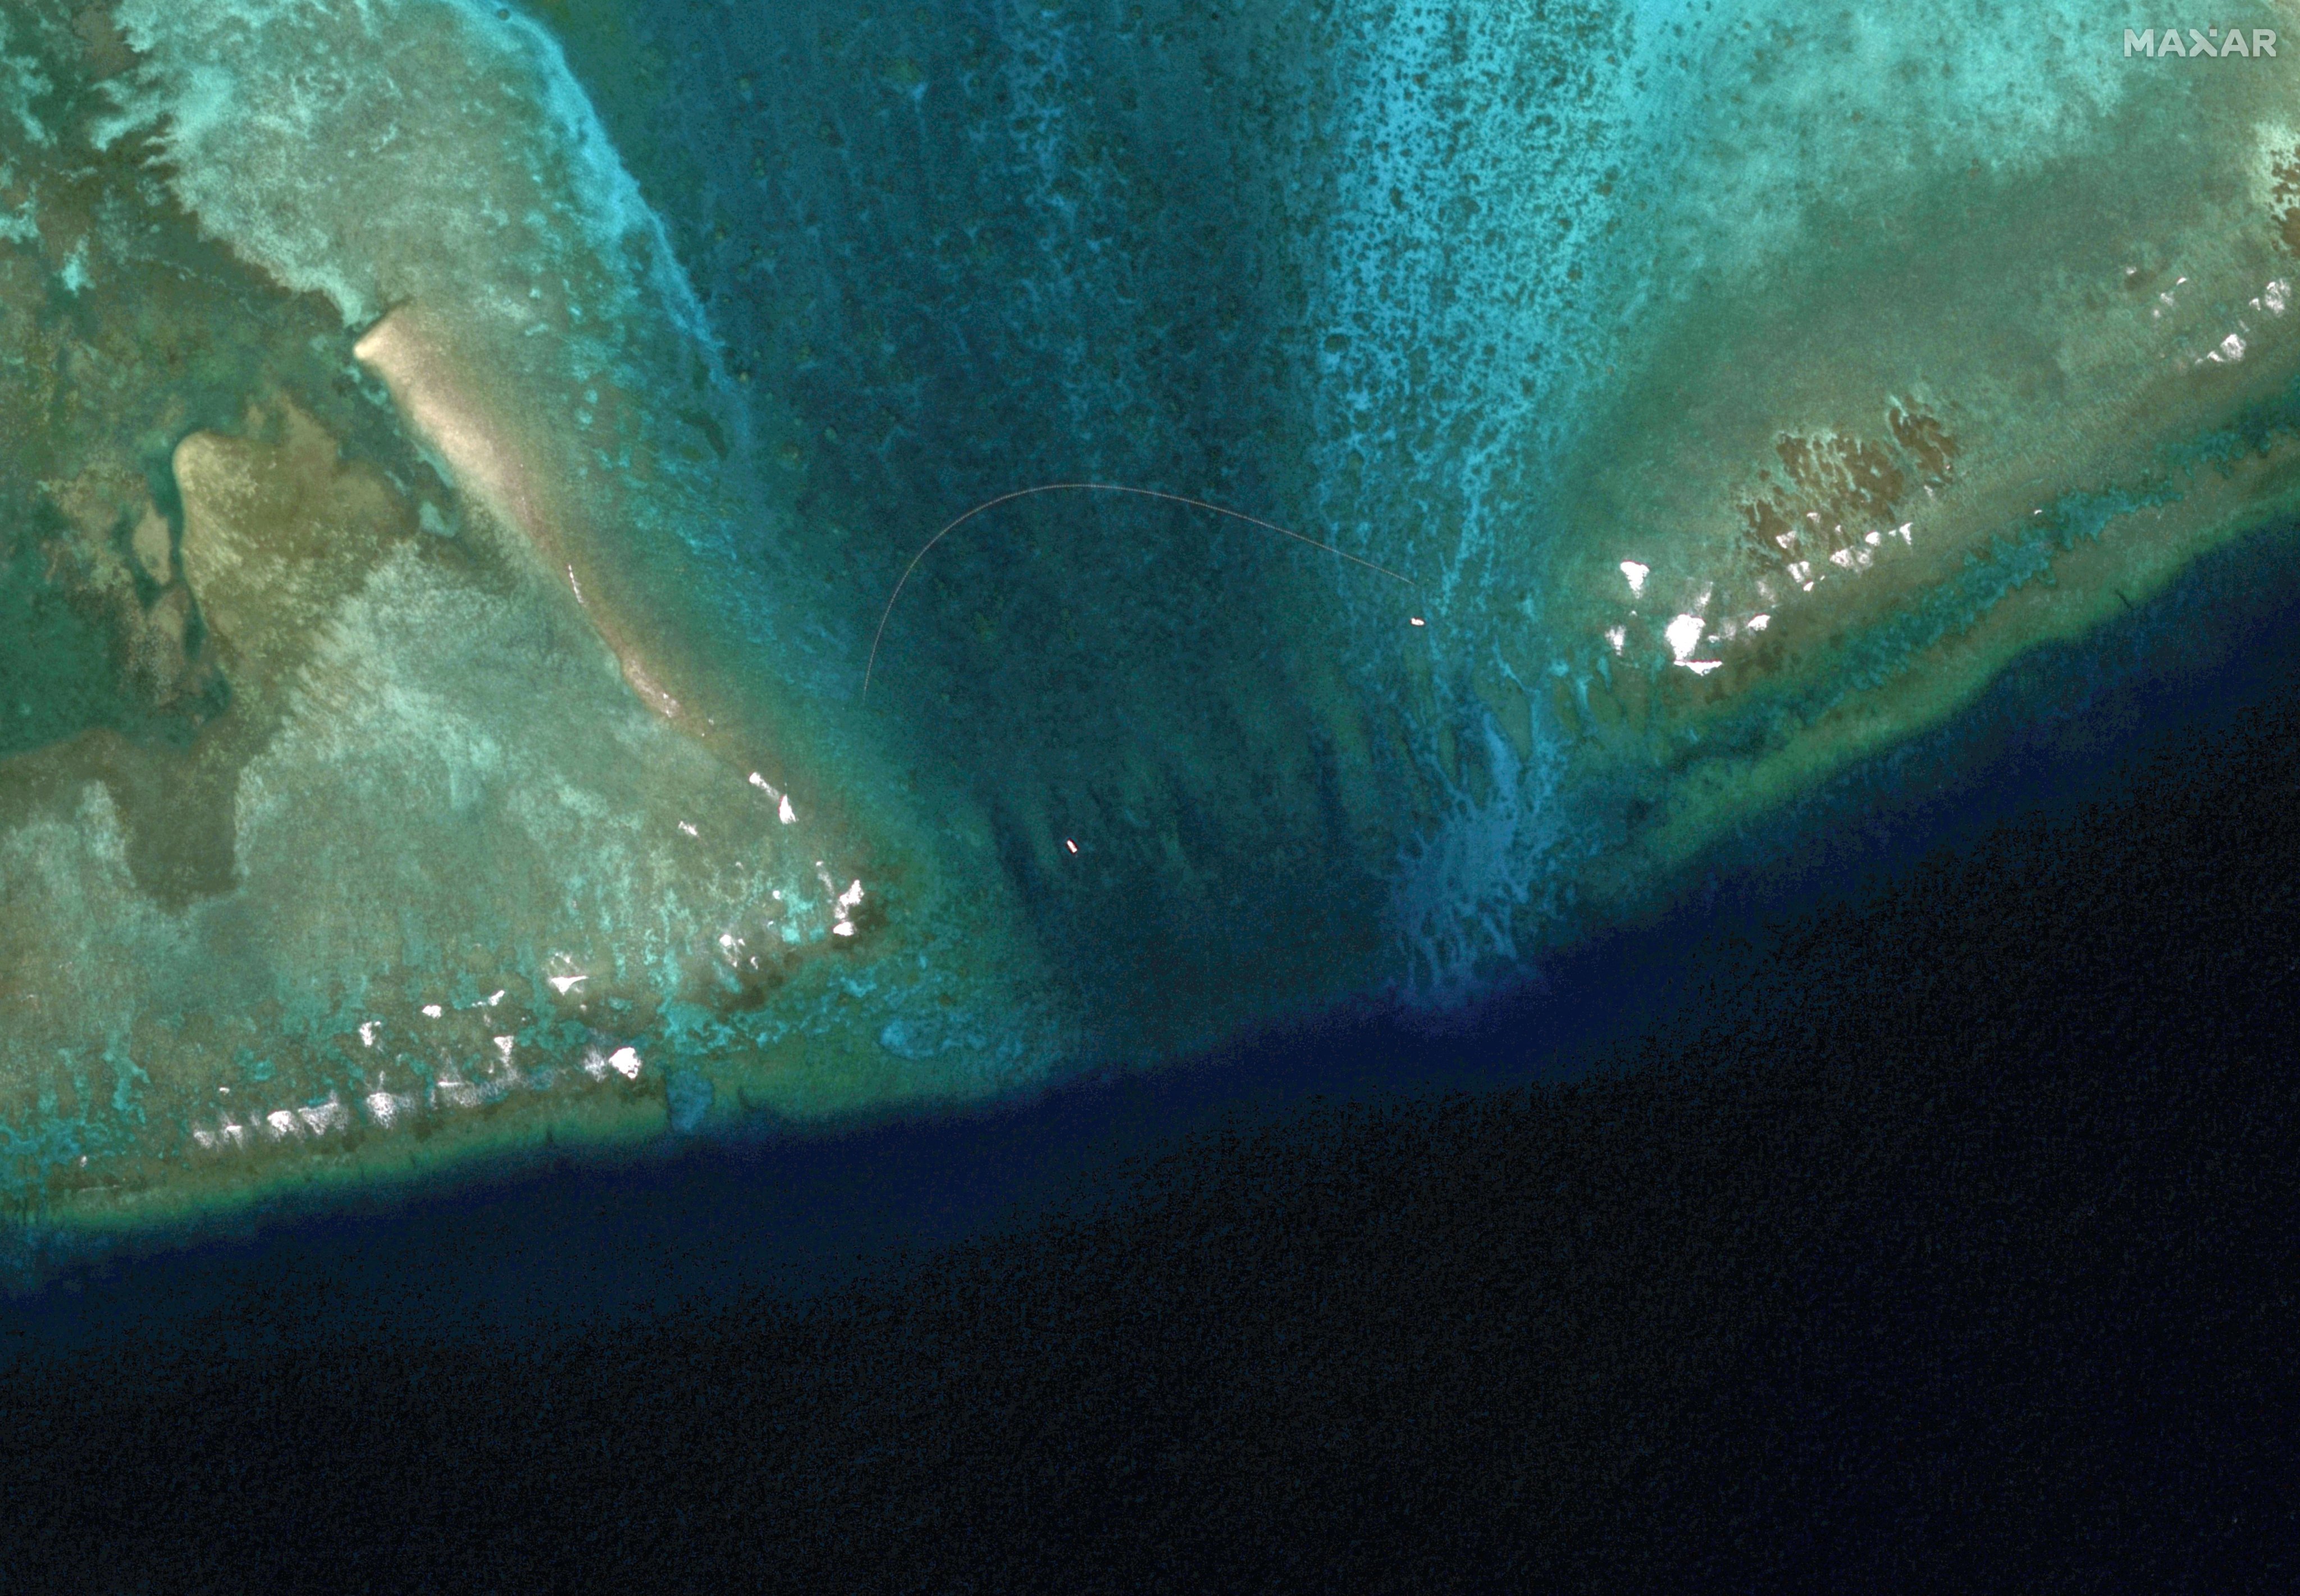 China’s foreign minister confirmed that a floating barrier was set up at the entrance of the Scarborough Shoal in the South China Sea, which it said is the country’s “inherent territory”. Photo: Reuters